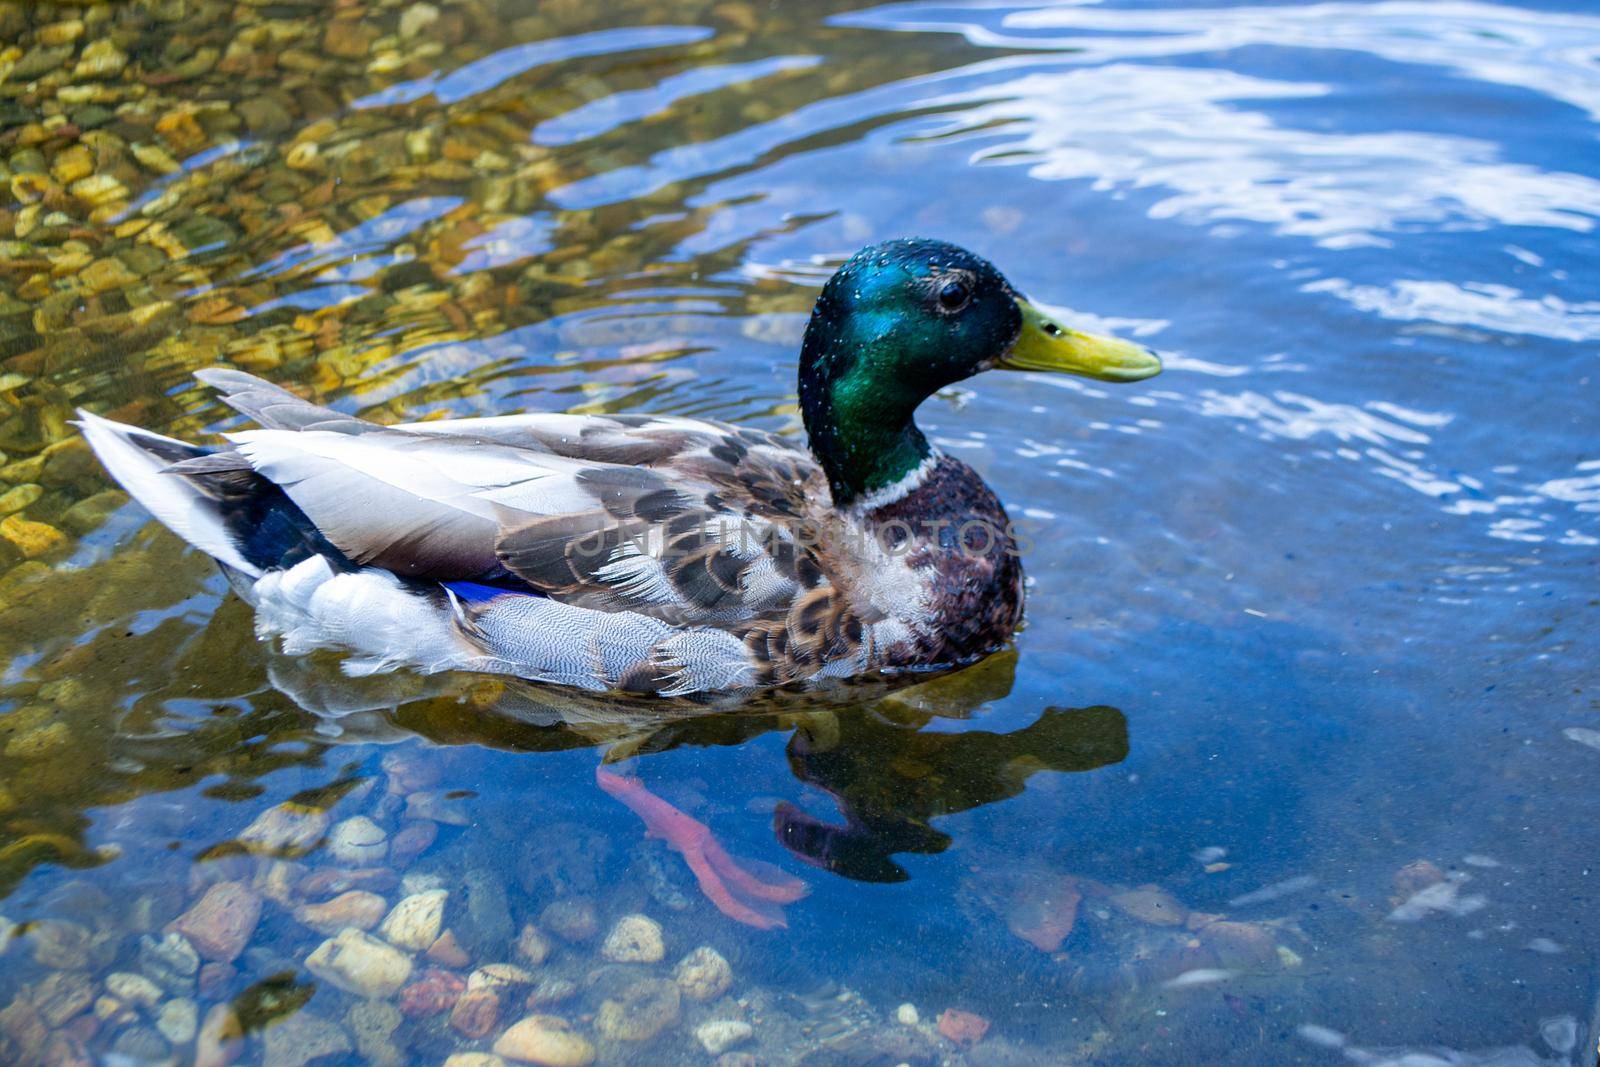 Image of an animal a wild drake and a duck sail on a pond by milastokerpro